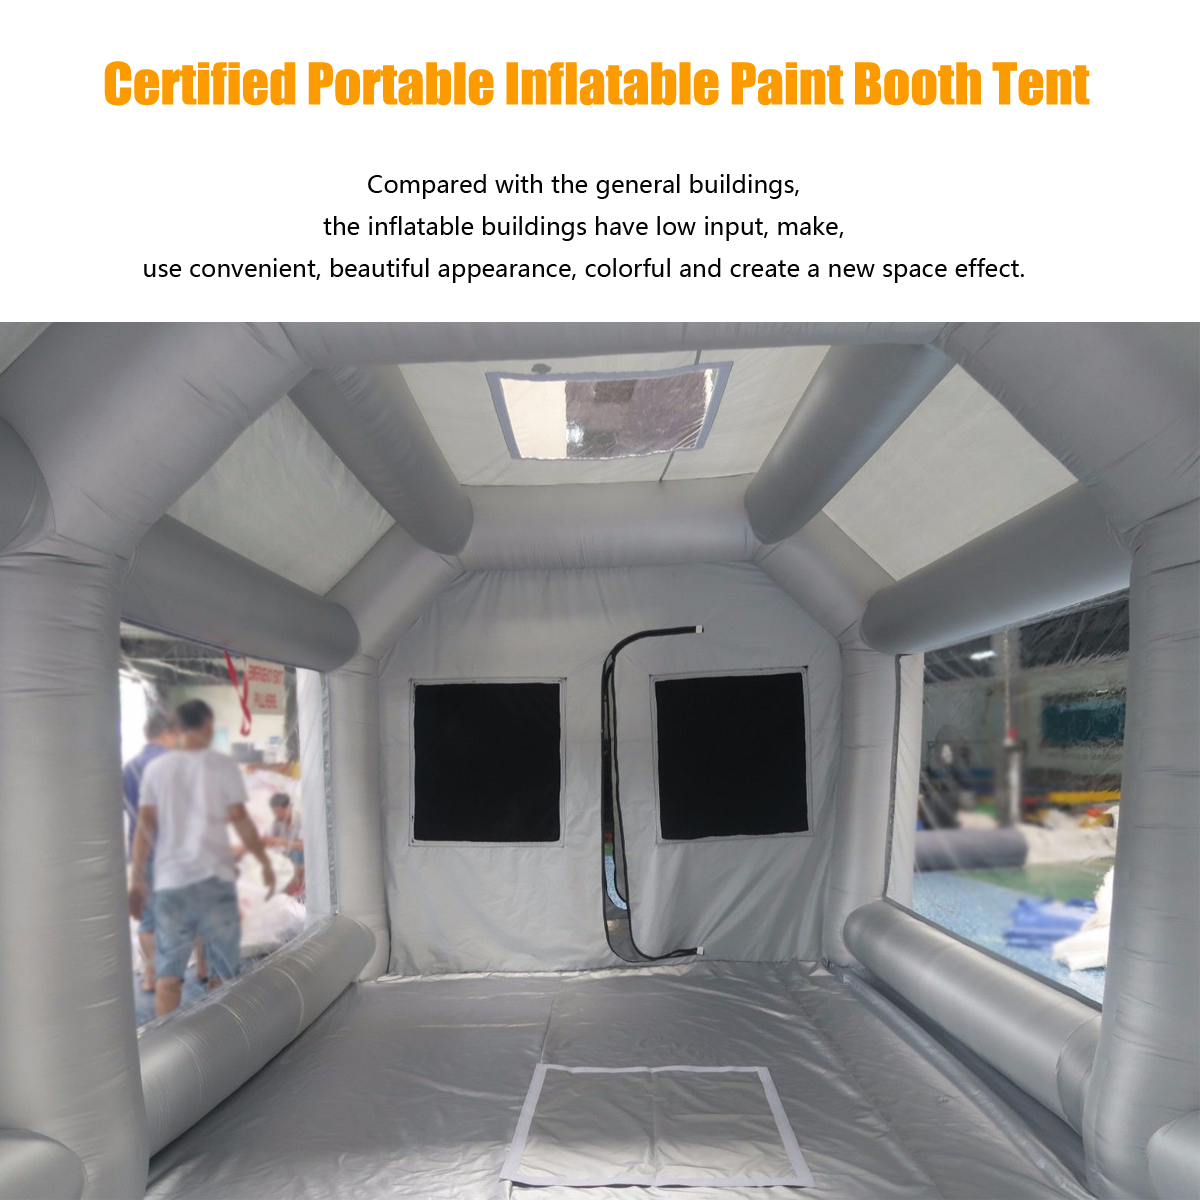 Portable-Giant-Oxford-Cloth-Inflatable-Tent-Workstation-Spray-Paint-With-110V-Blower-1293969